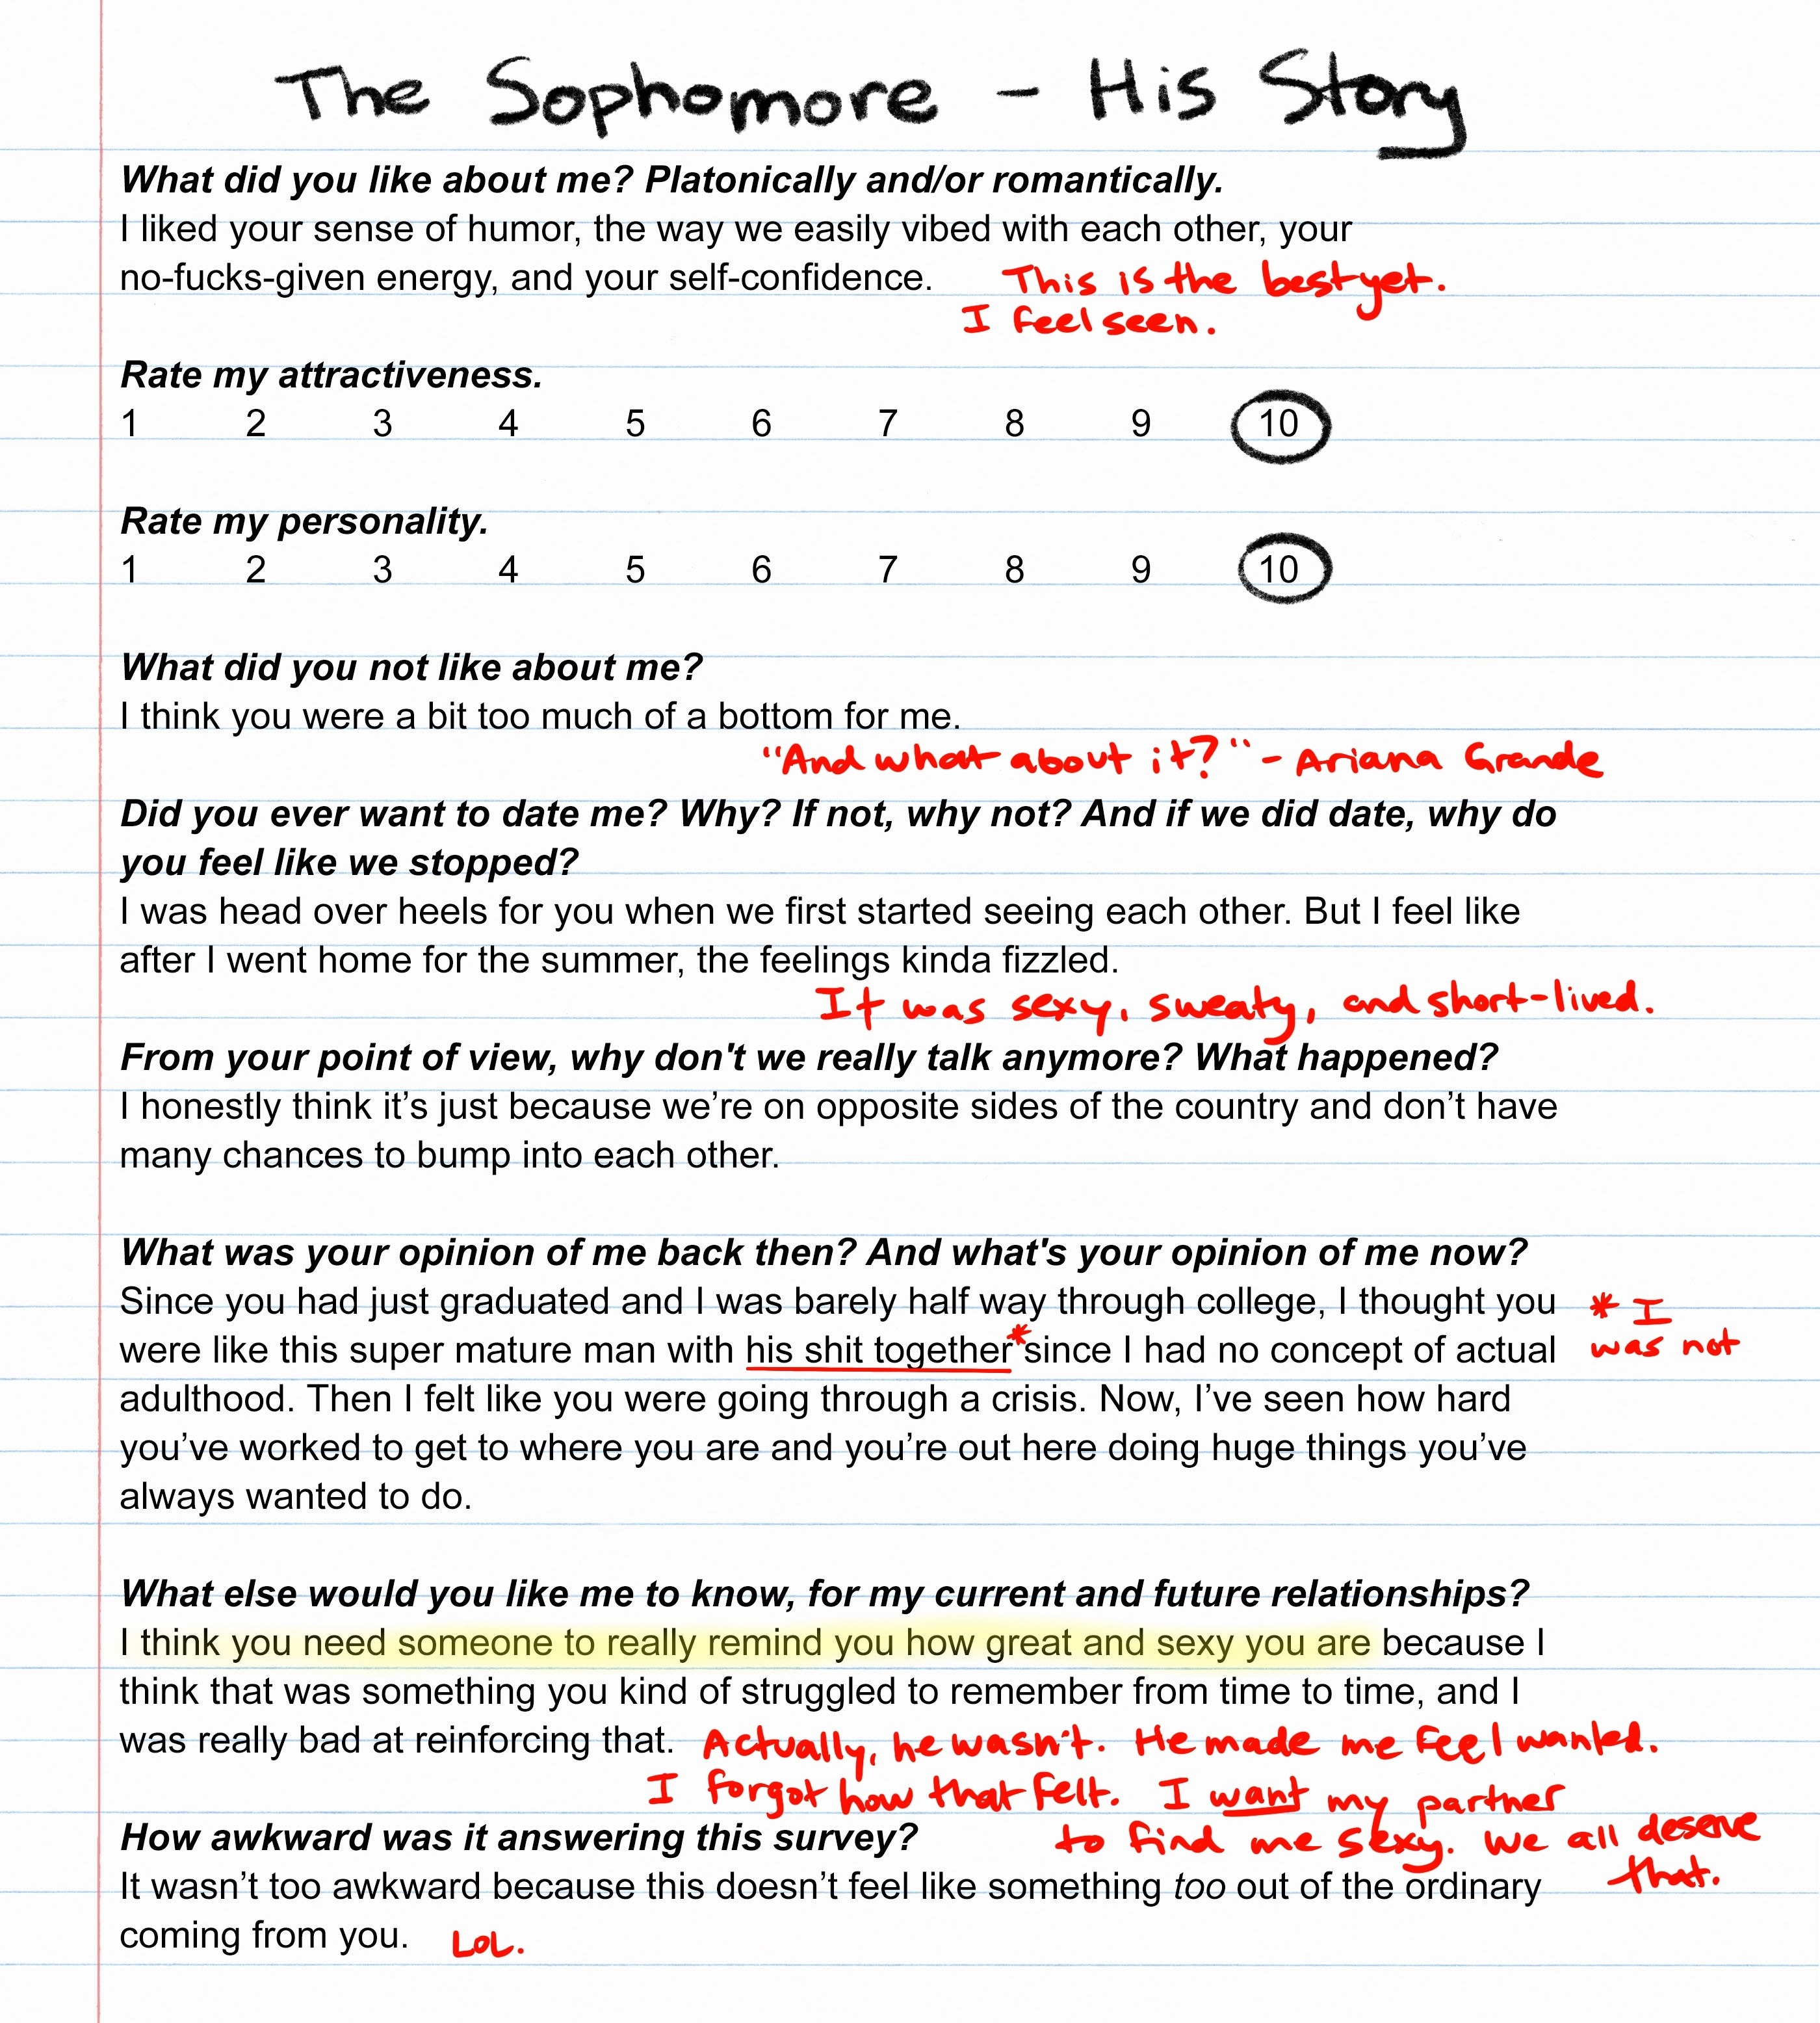 Survey results from The Sophomore with comments from the author in red